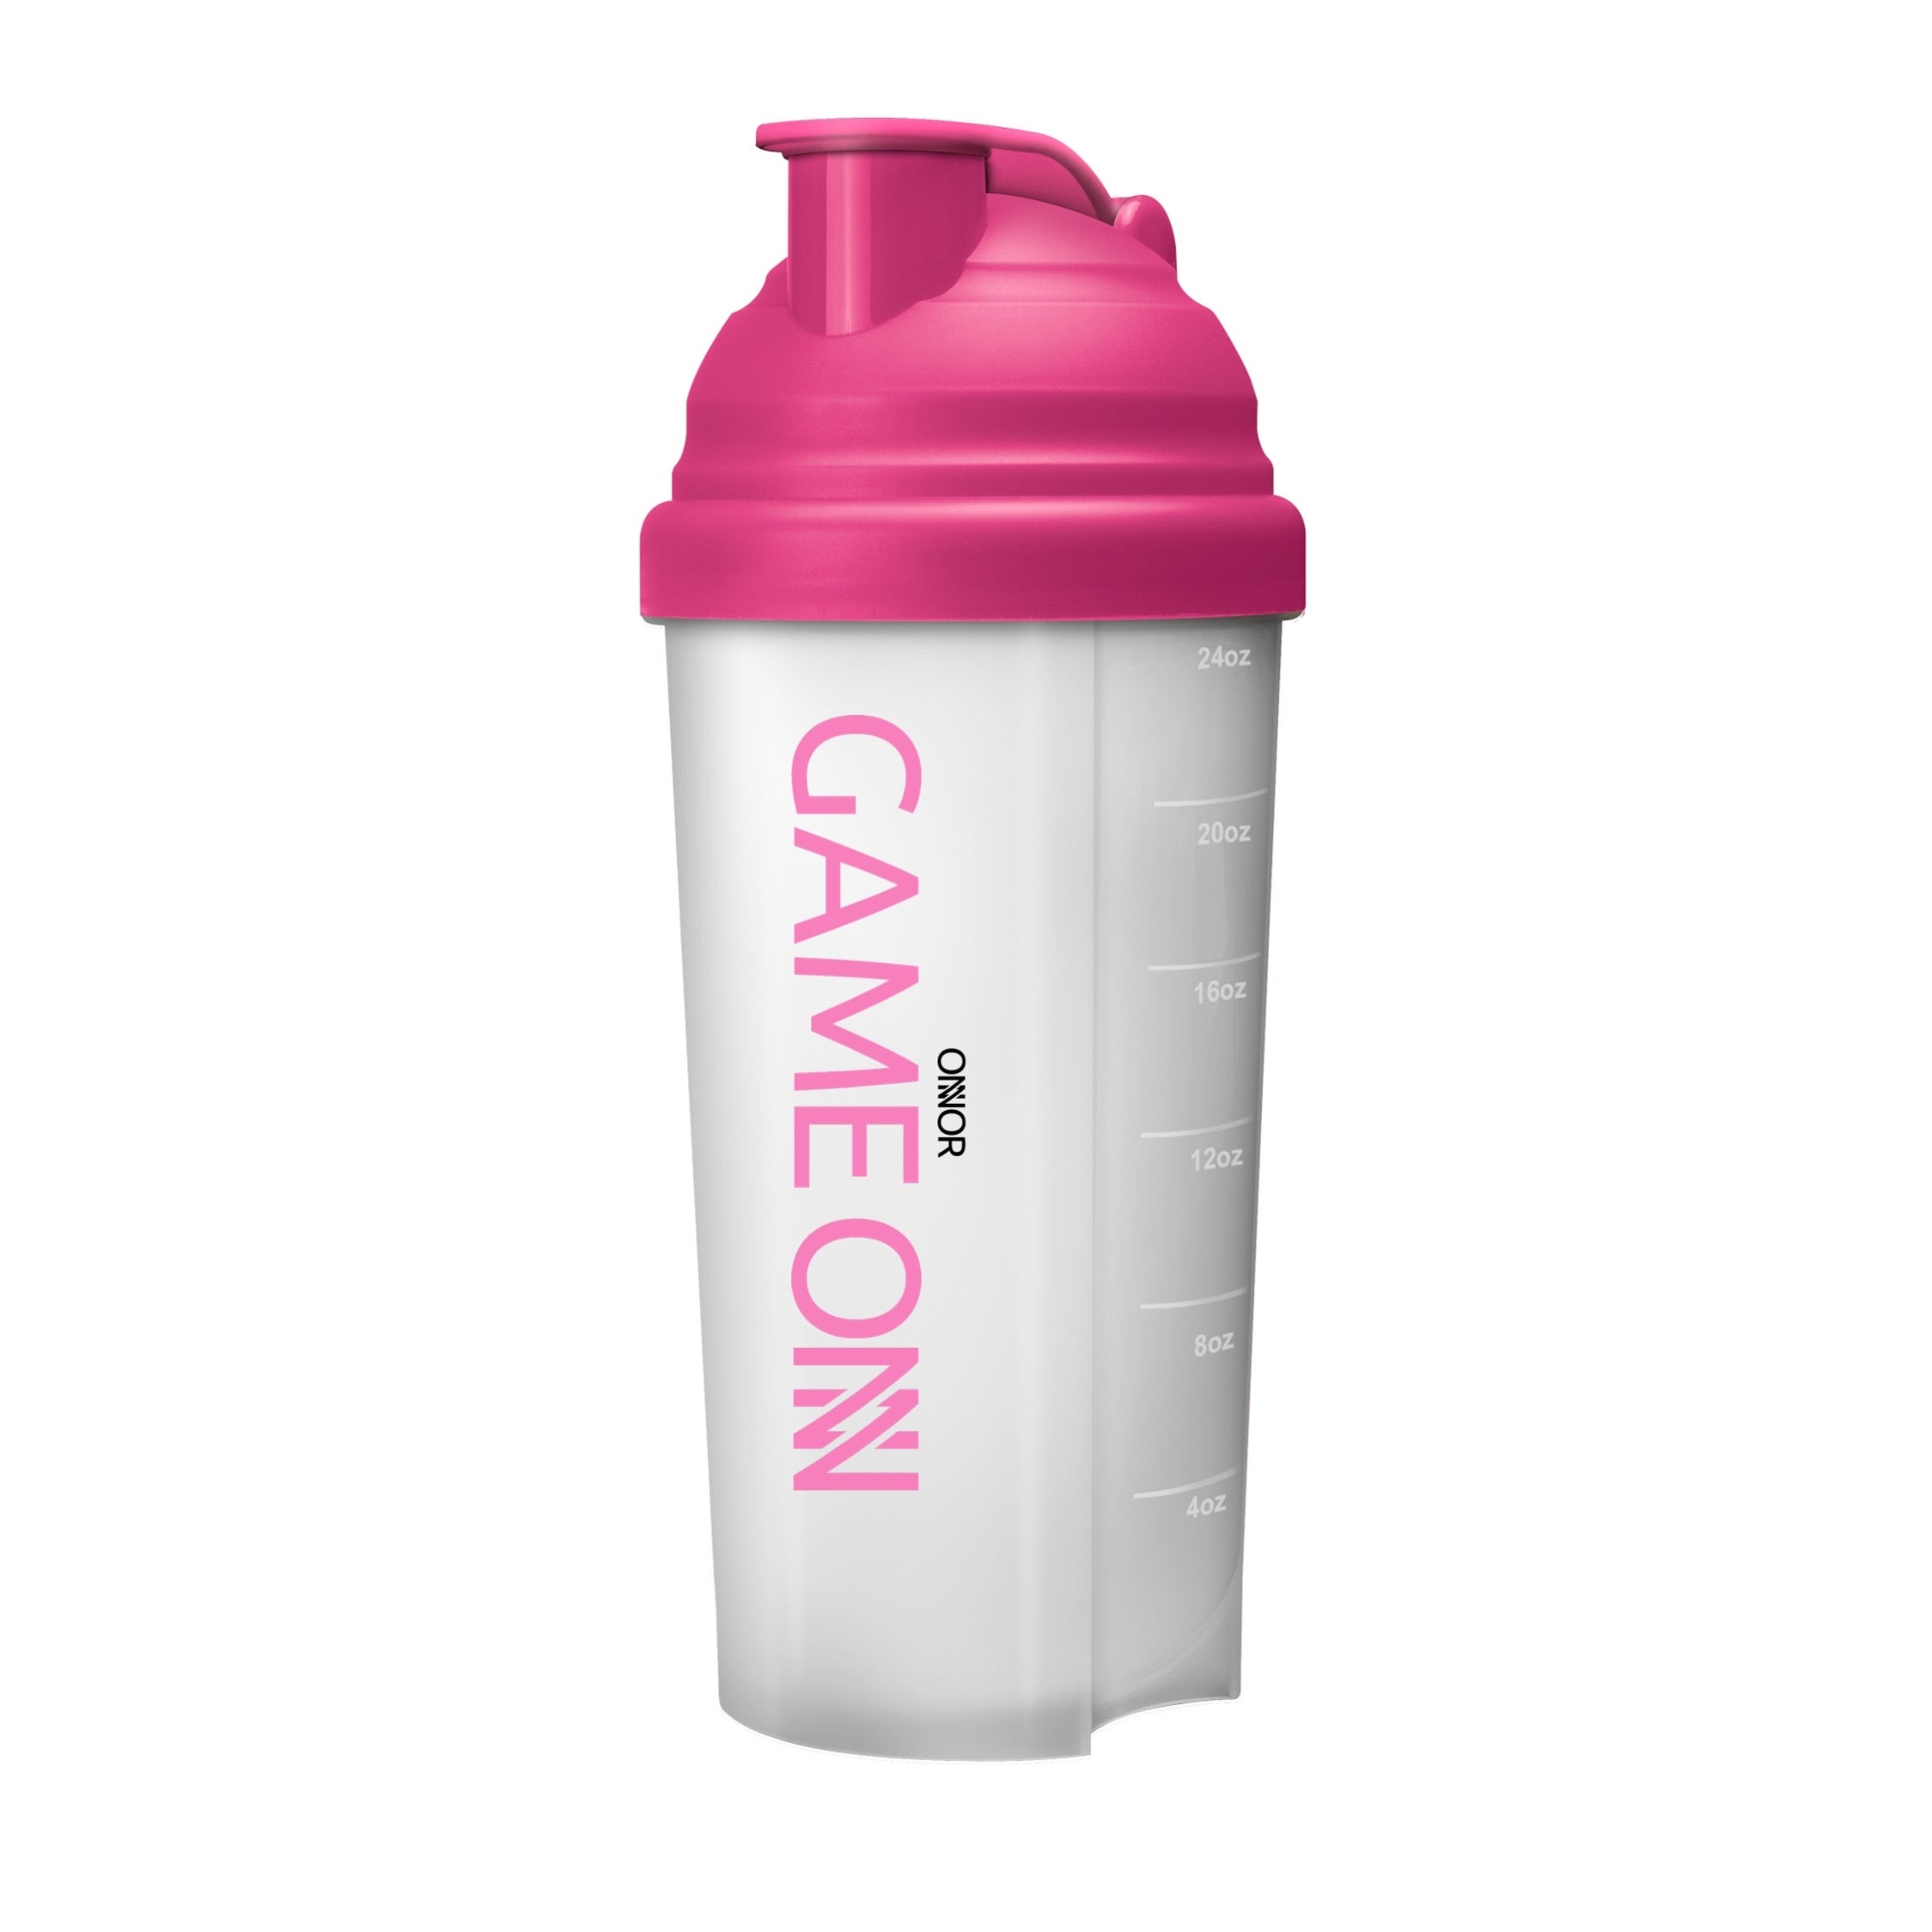 “Mix-it” Shaker – Pink – 700ml/24oz – ONNOR Limited